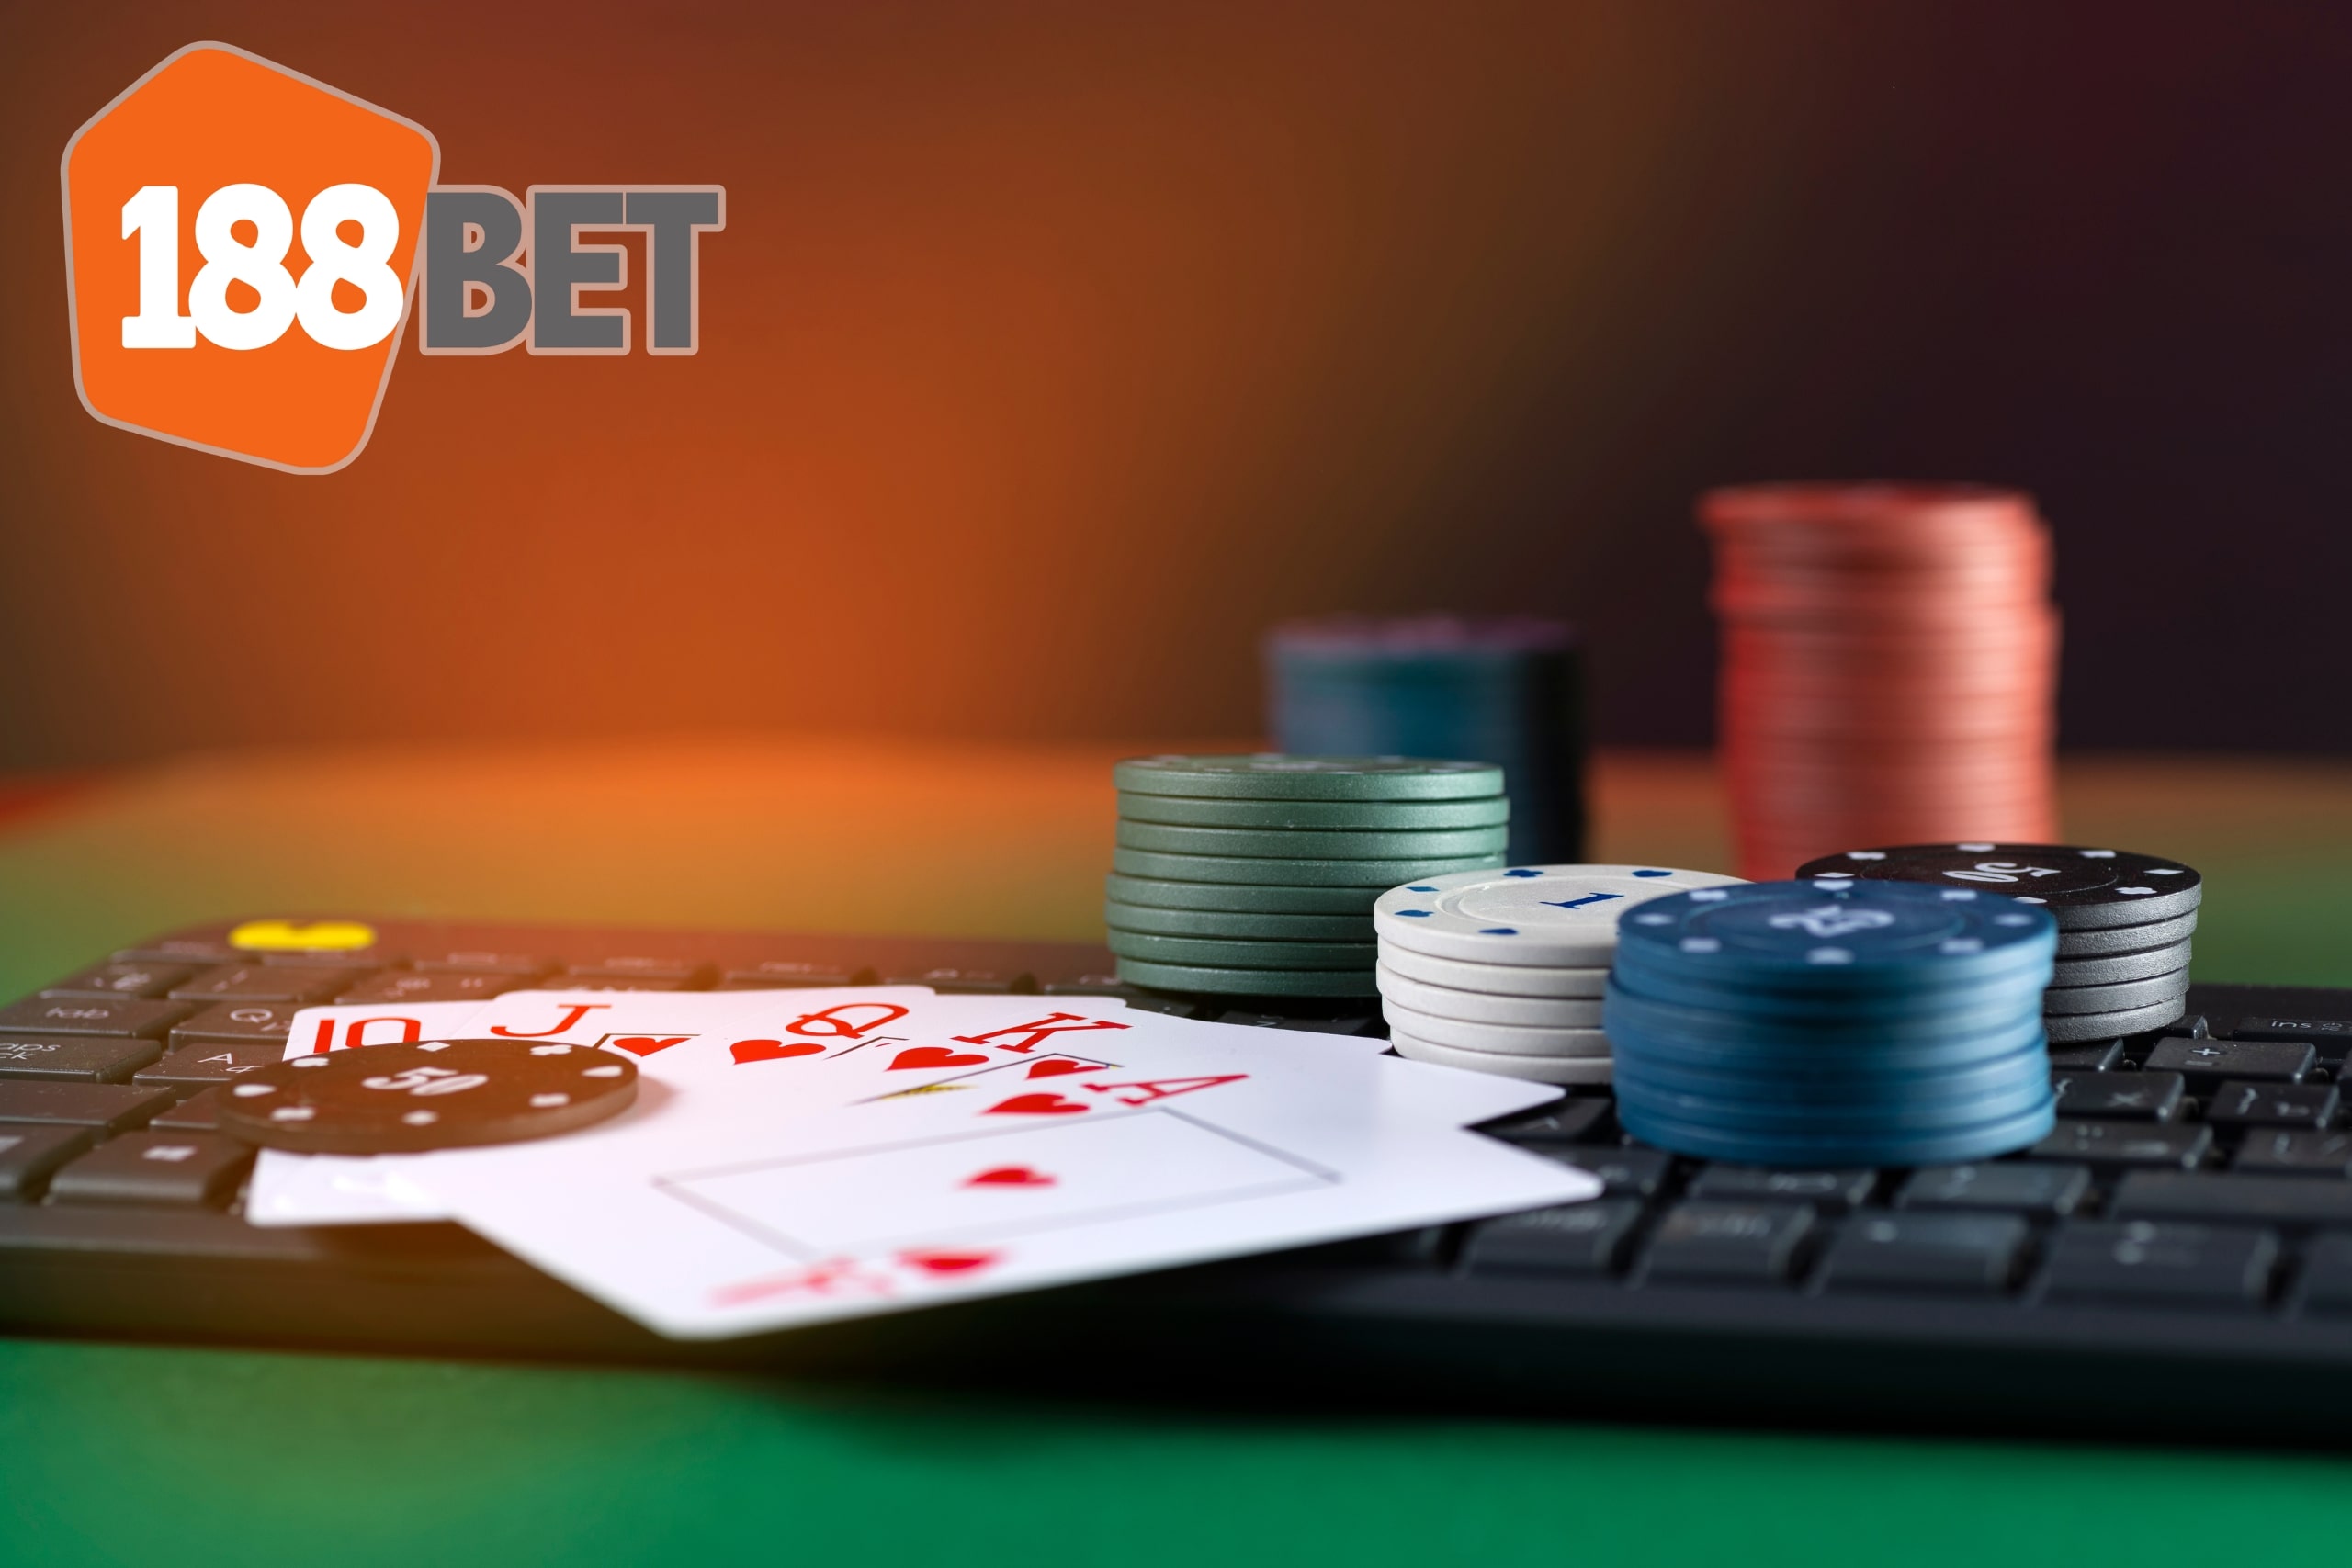 Evaluating 188Bet For Live Betting: Is It The Right Platform For You?